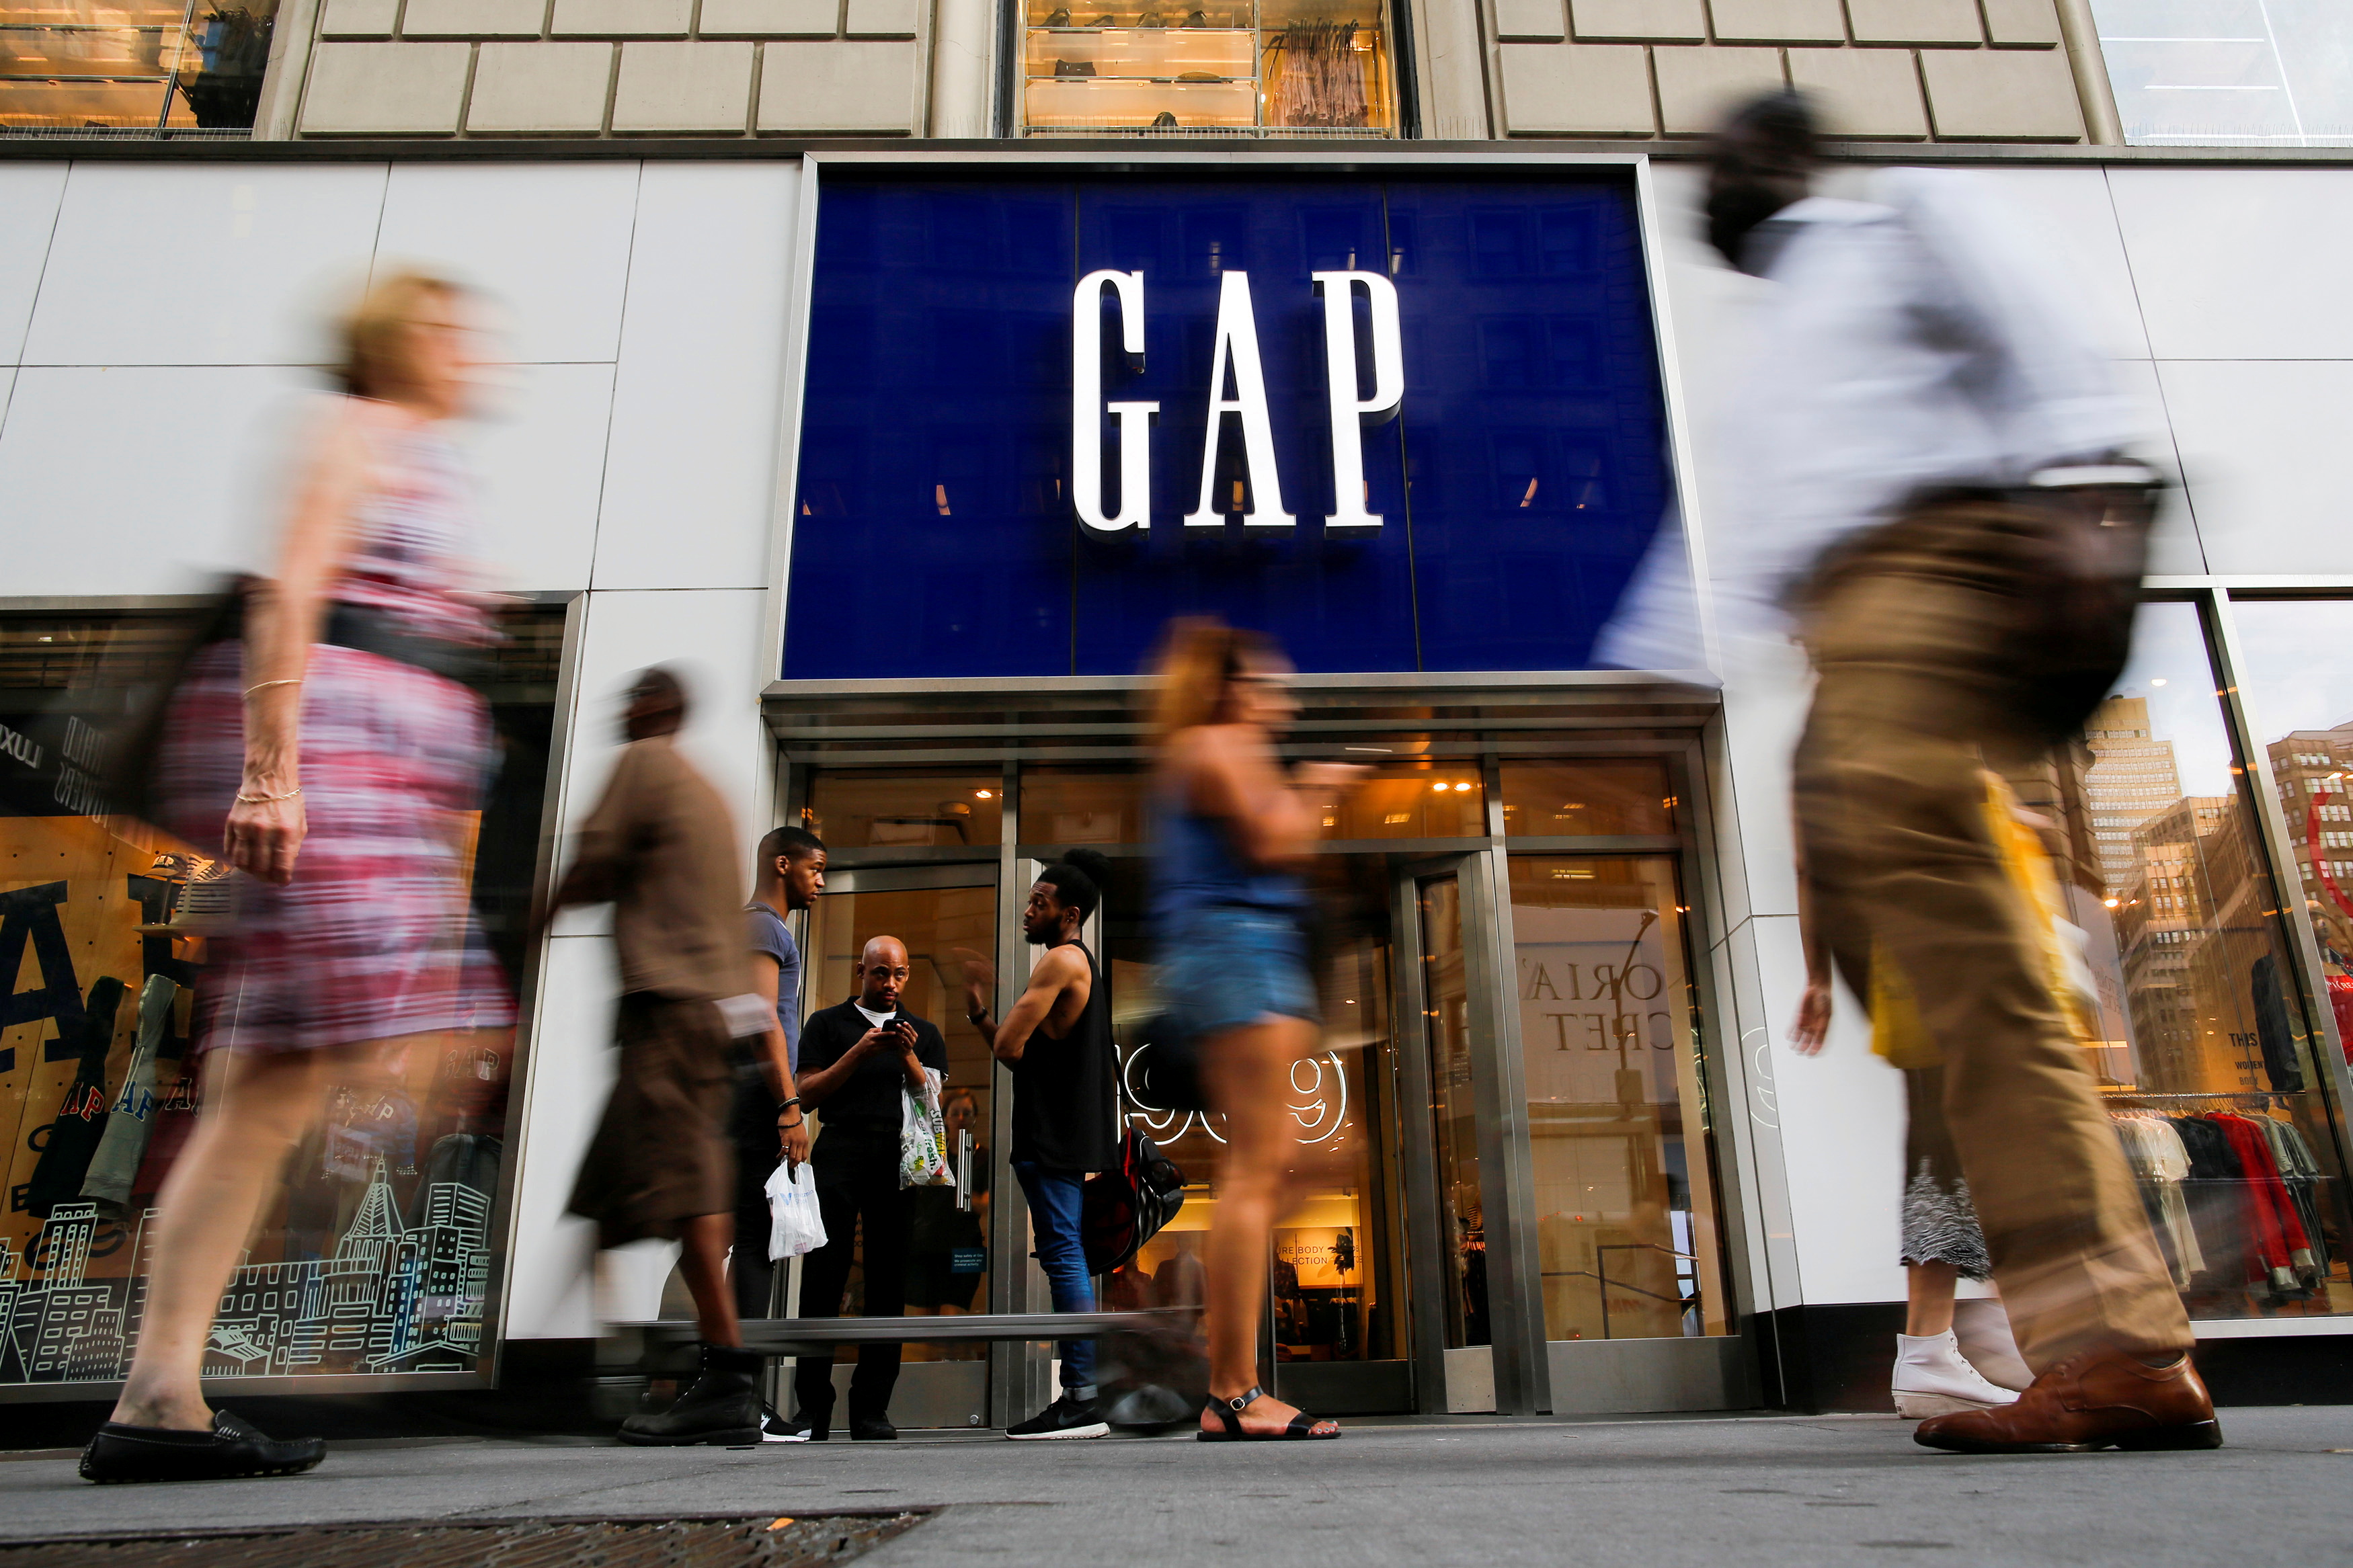 FILE PHOTO: People pass by the GAP clothing retail store in Manhattan, New York, U.S., August 15, 2016. REUTERS/Eduardo Munoz